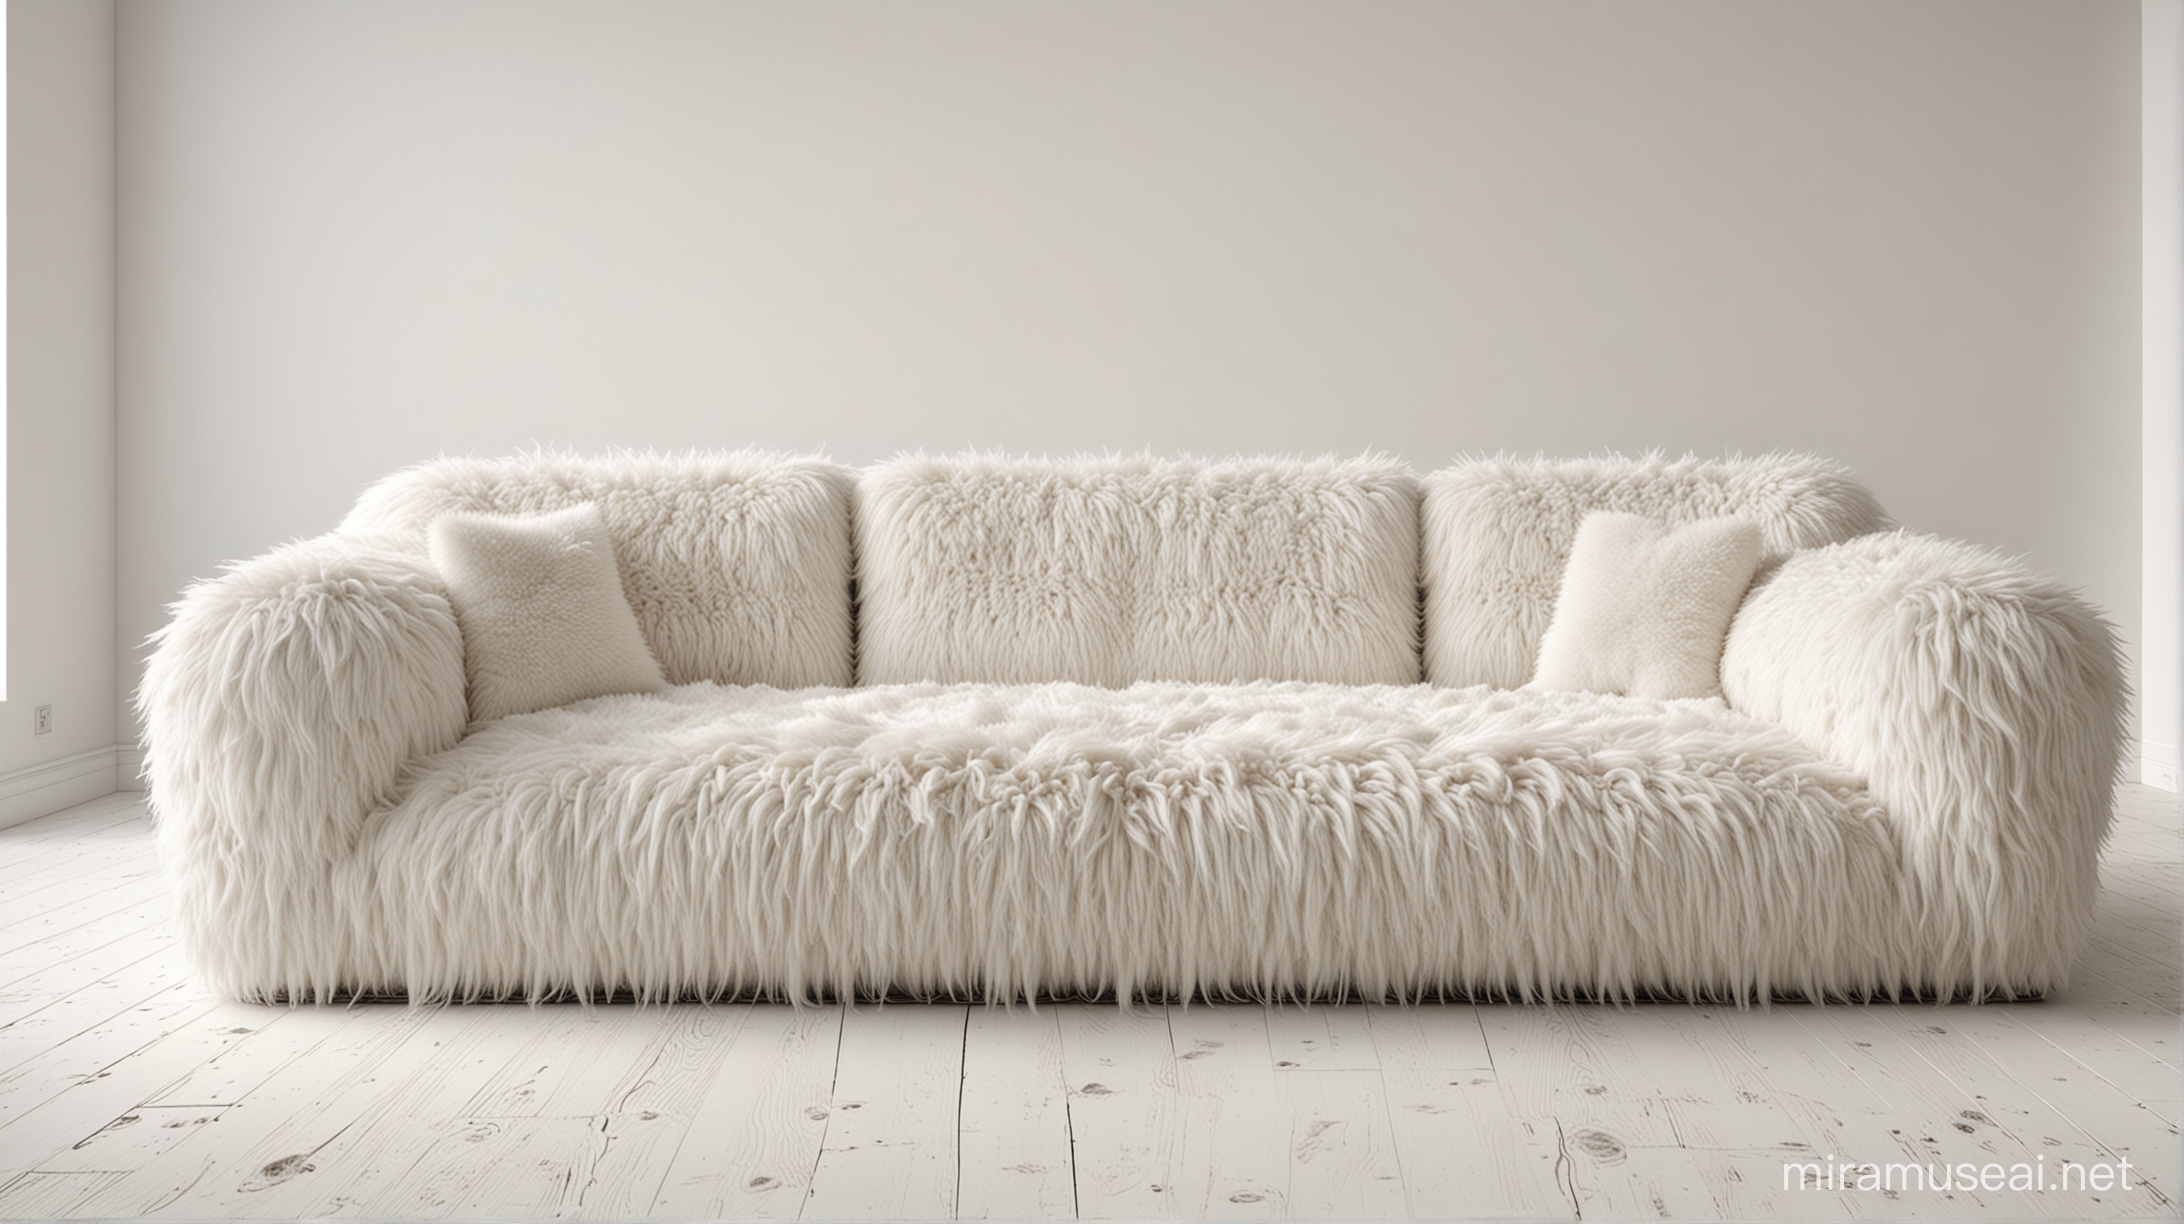 hyper realistic image of a very large couch that is made completely out of white fluffy fur, in a white room